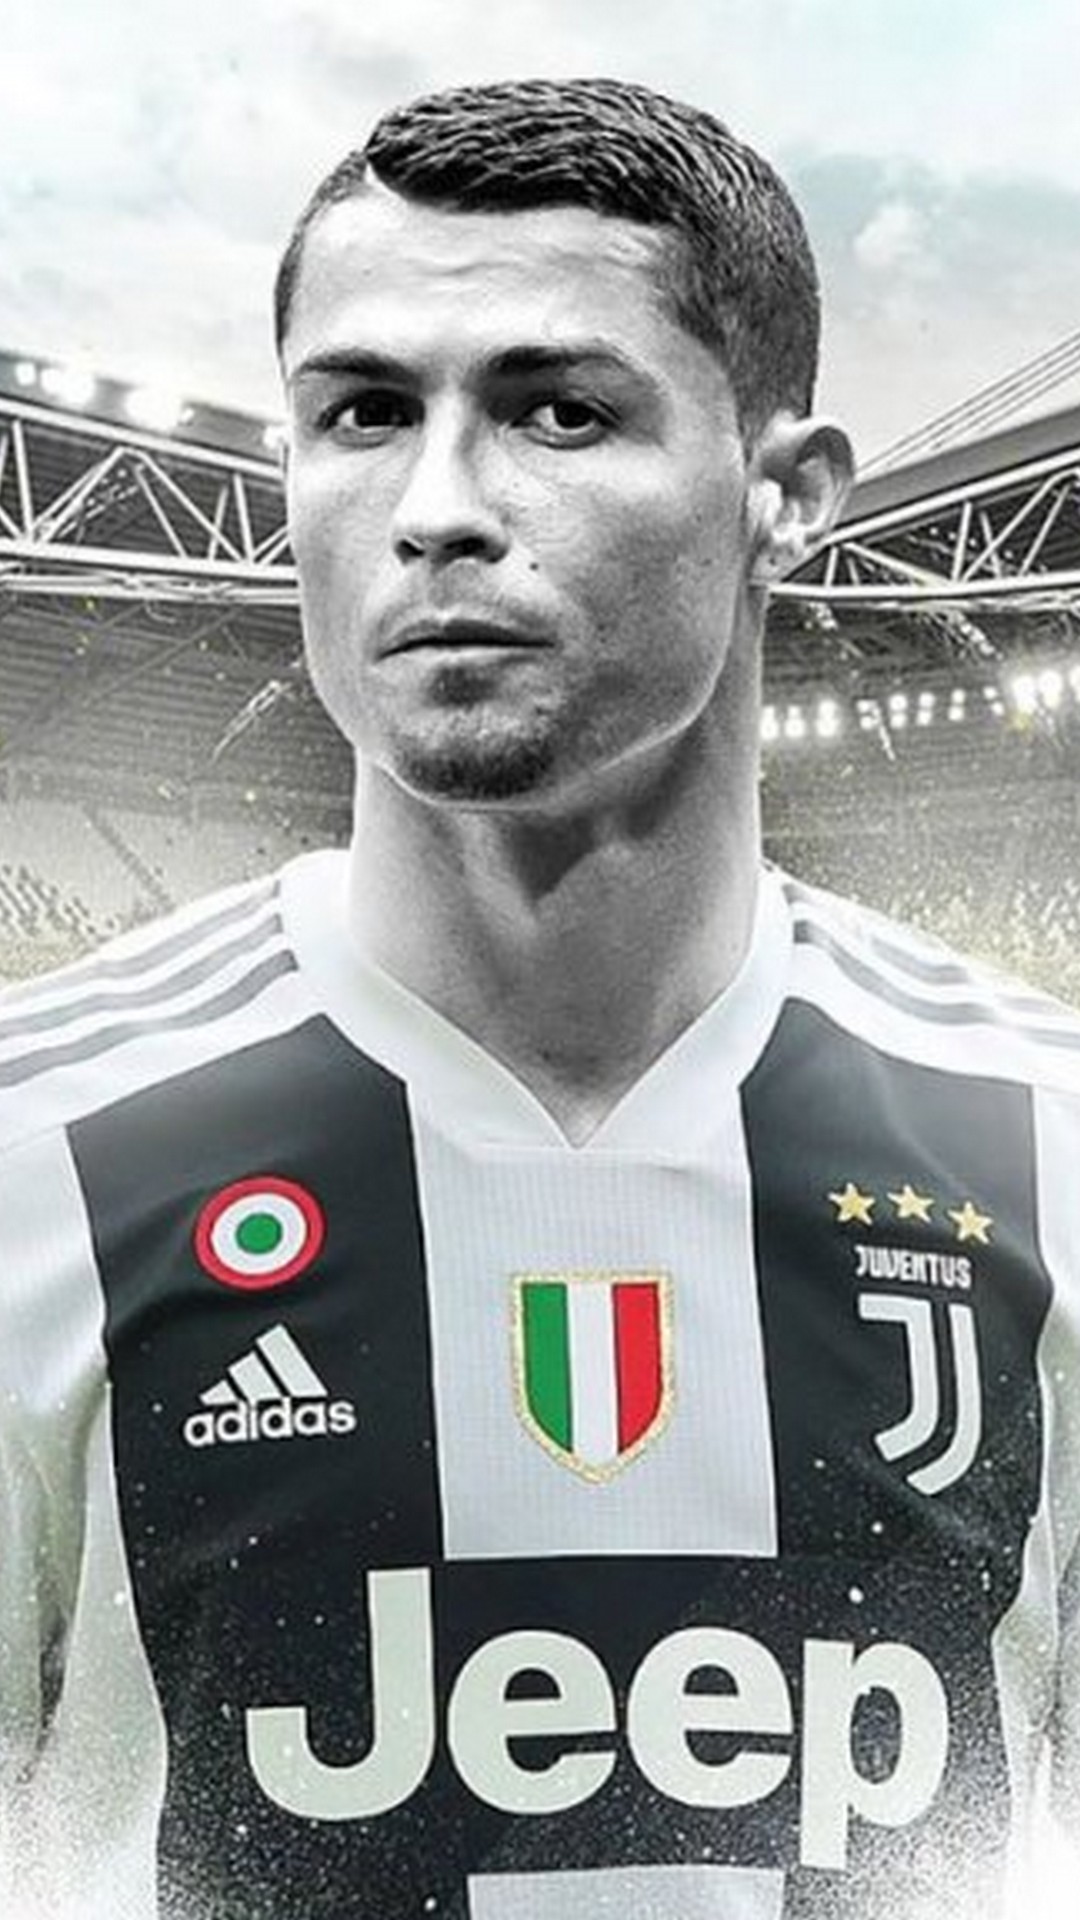 Android Wallpaper CR7 Juventus with image resolution 1080x1920 pixel. You can make this wallpaper for your Android backgrounds, Tablet, Smartphones Screensavers and Mobile Phone Lock Screen